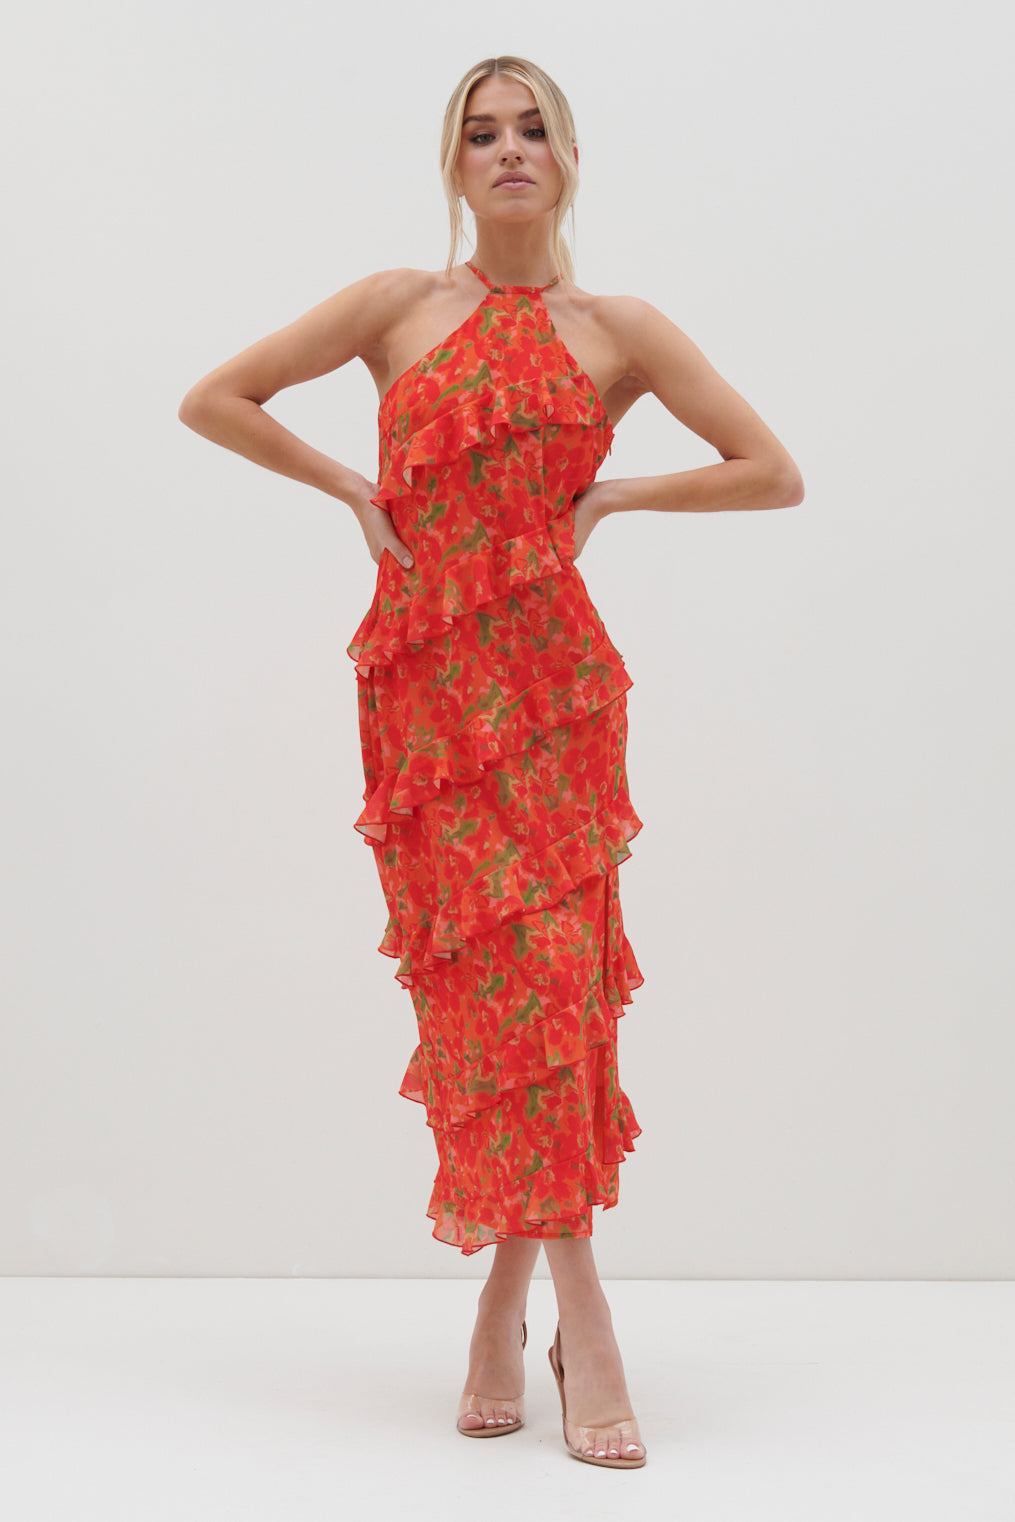 Katy Ruffle Midaxi Dress - Red and Orange Floral